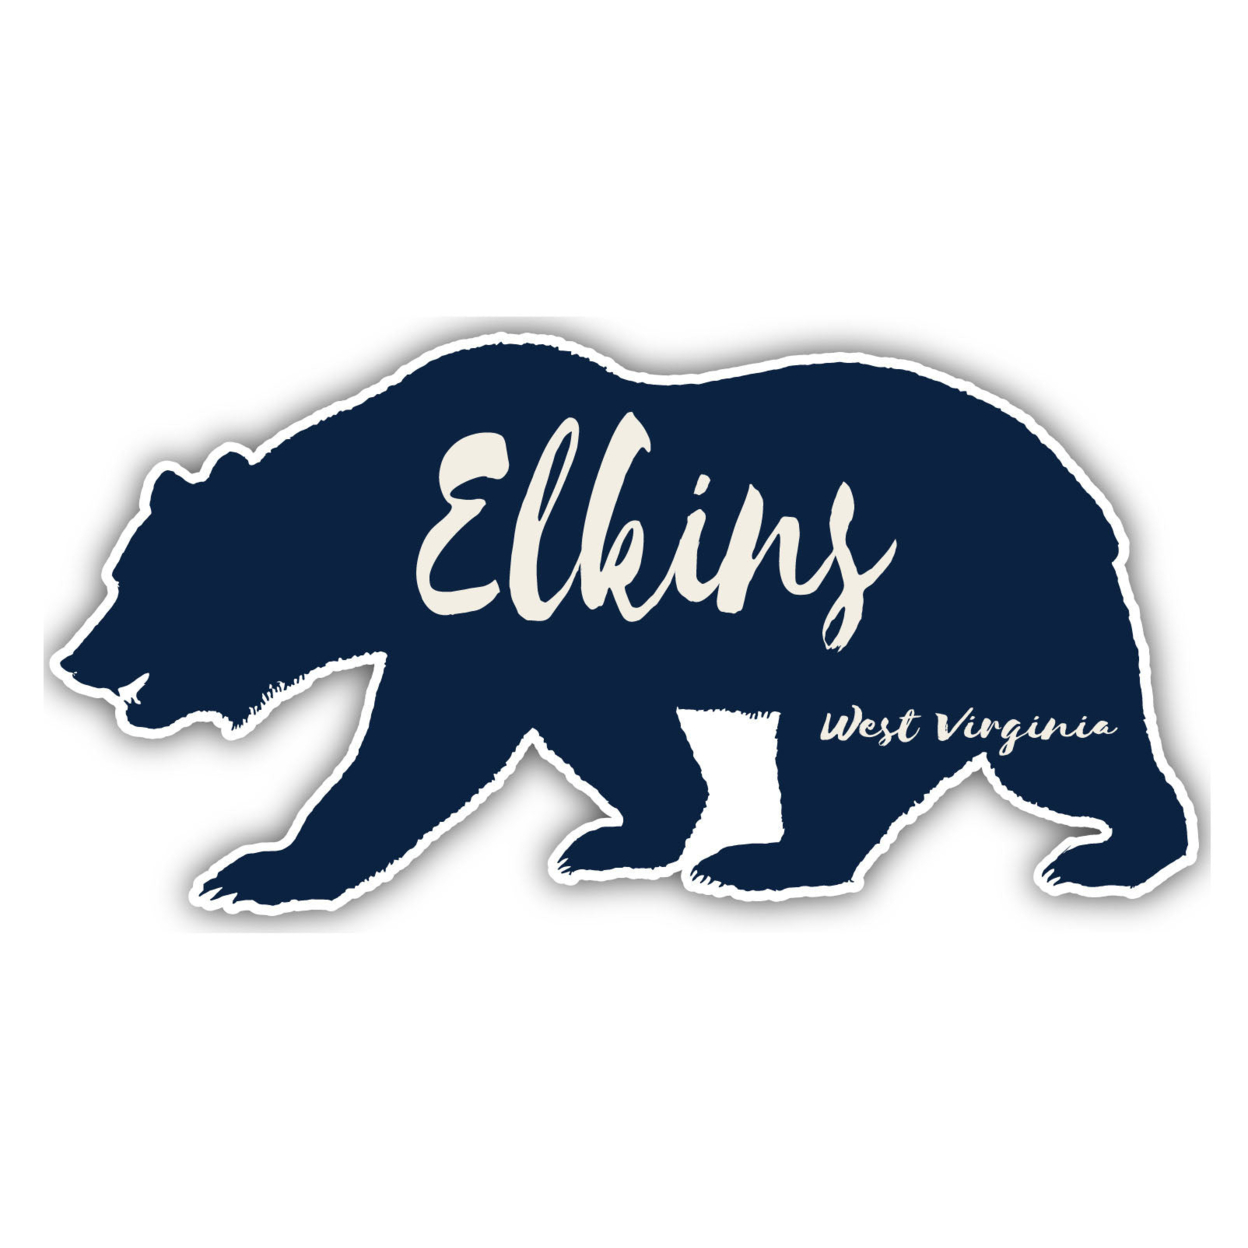 Elkins West Virginia Souvenir Decorative Stickers (Choose Theme And Size) - 4-Pack, 12-Inch, Camp Life